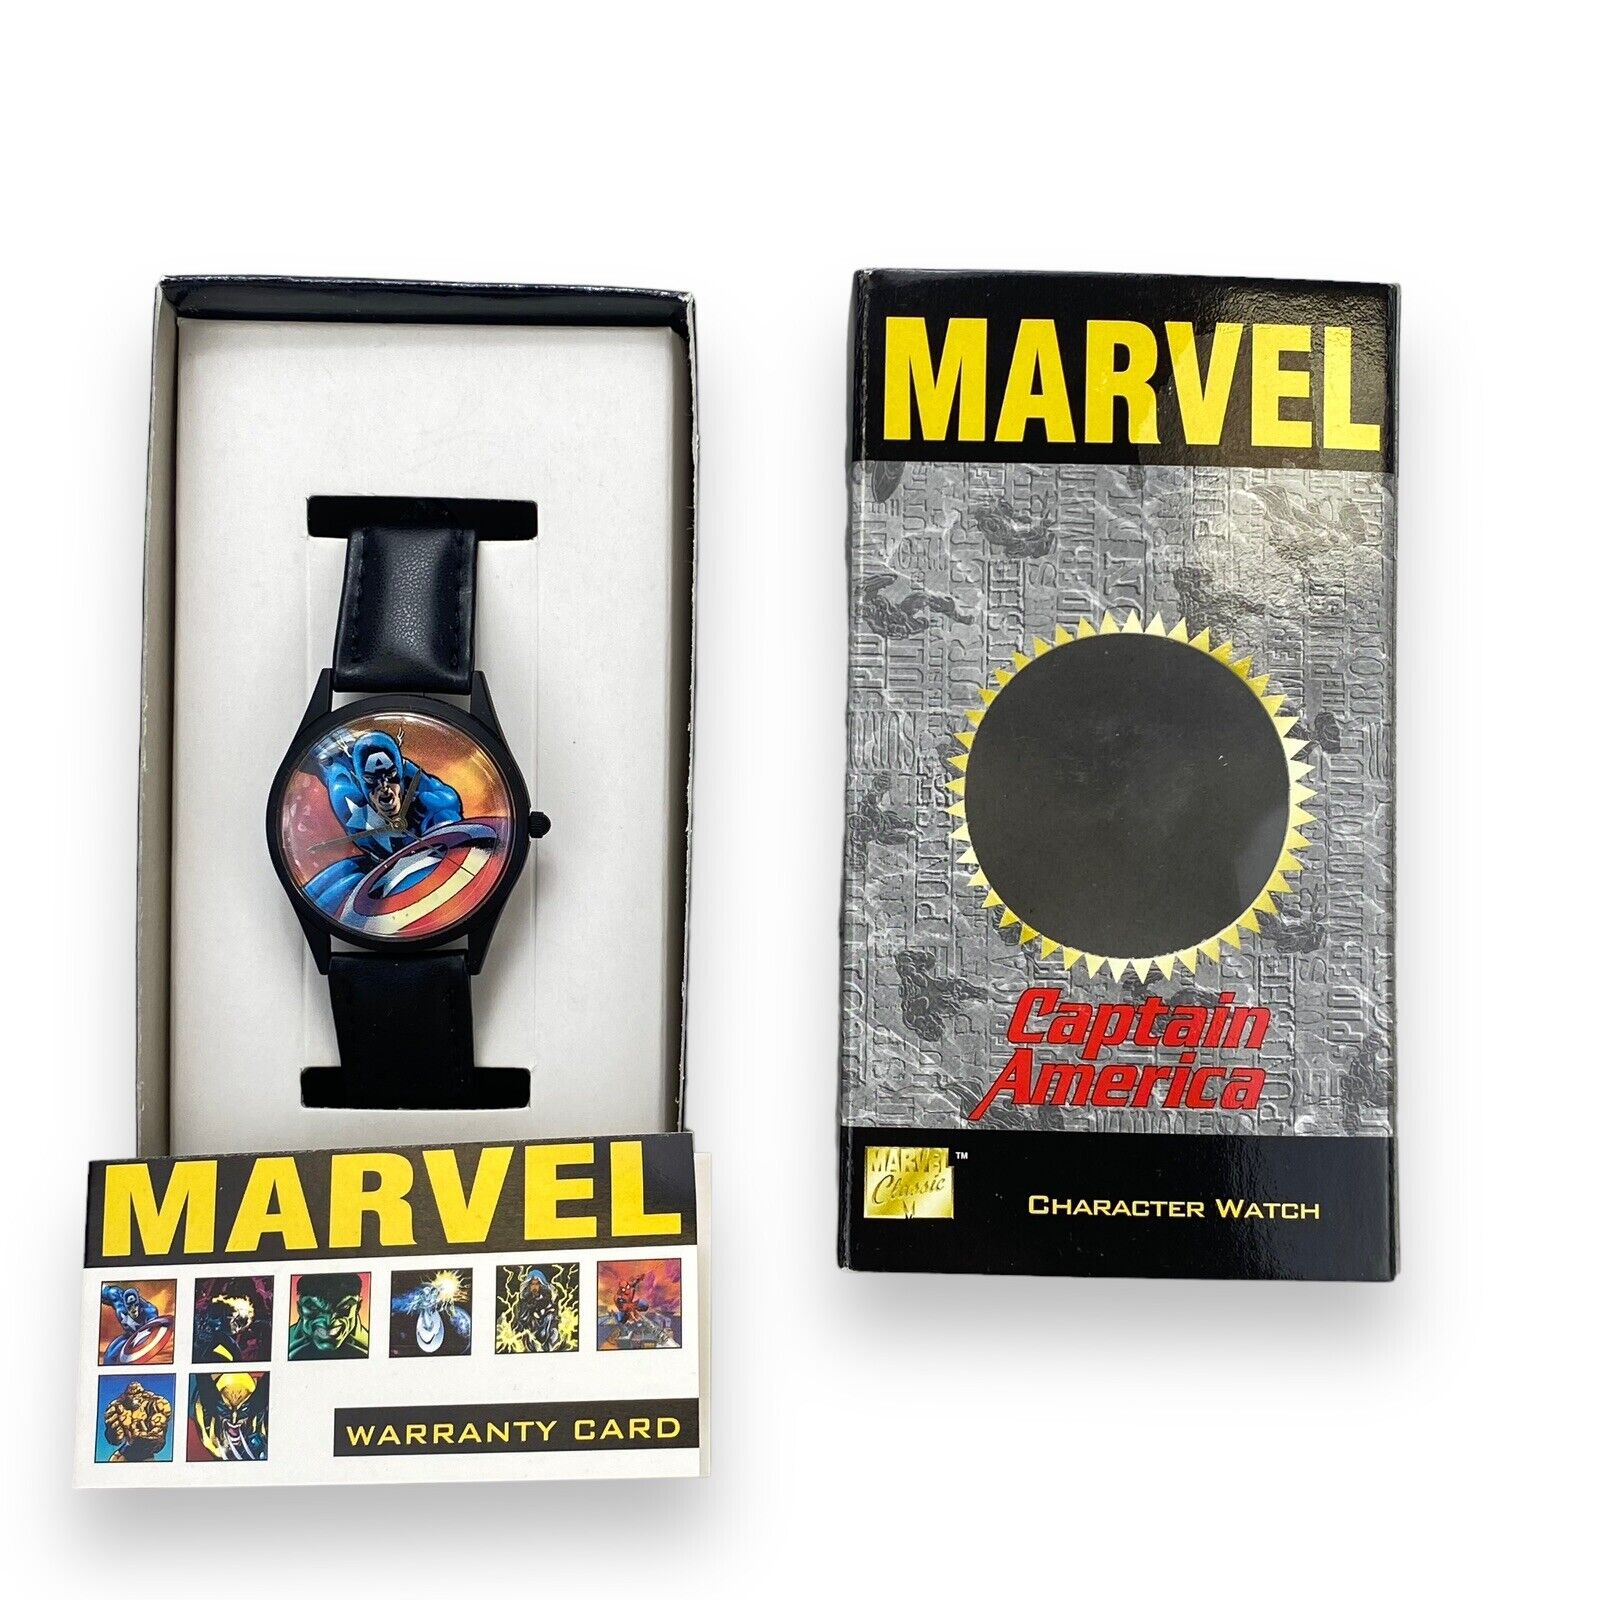 VTG 1996 Captain America Classic Character Watch Adult Wristwatch Marvel - NEW